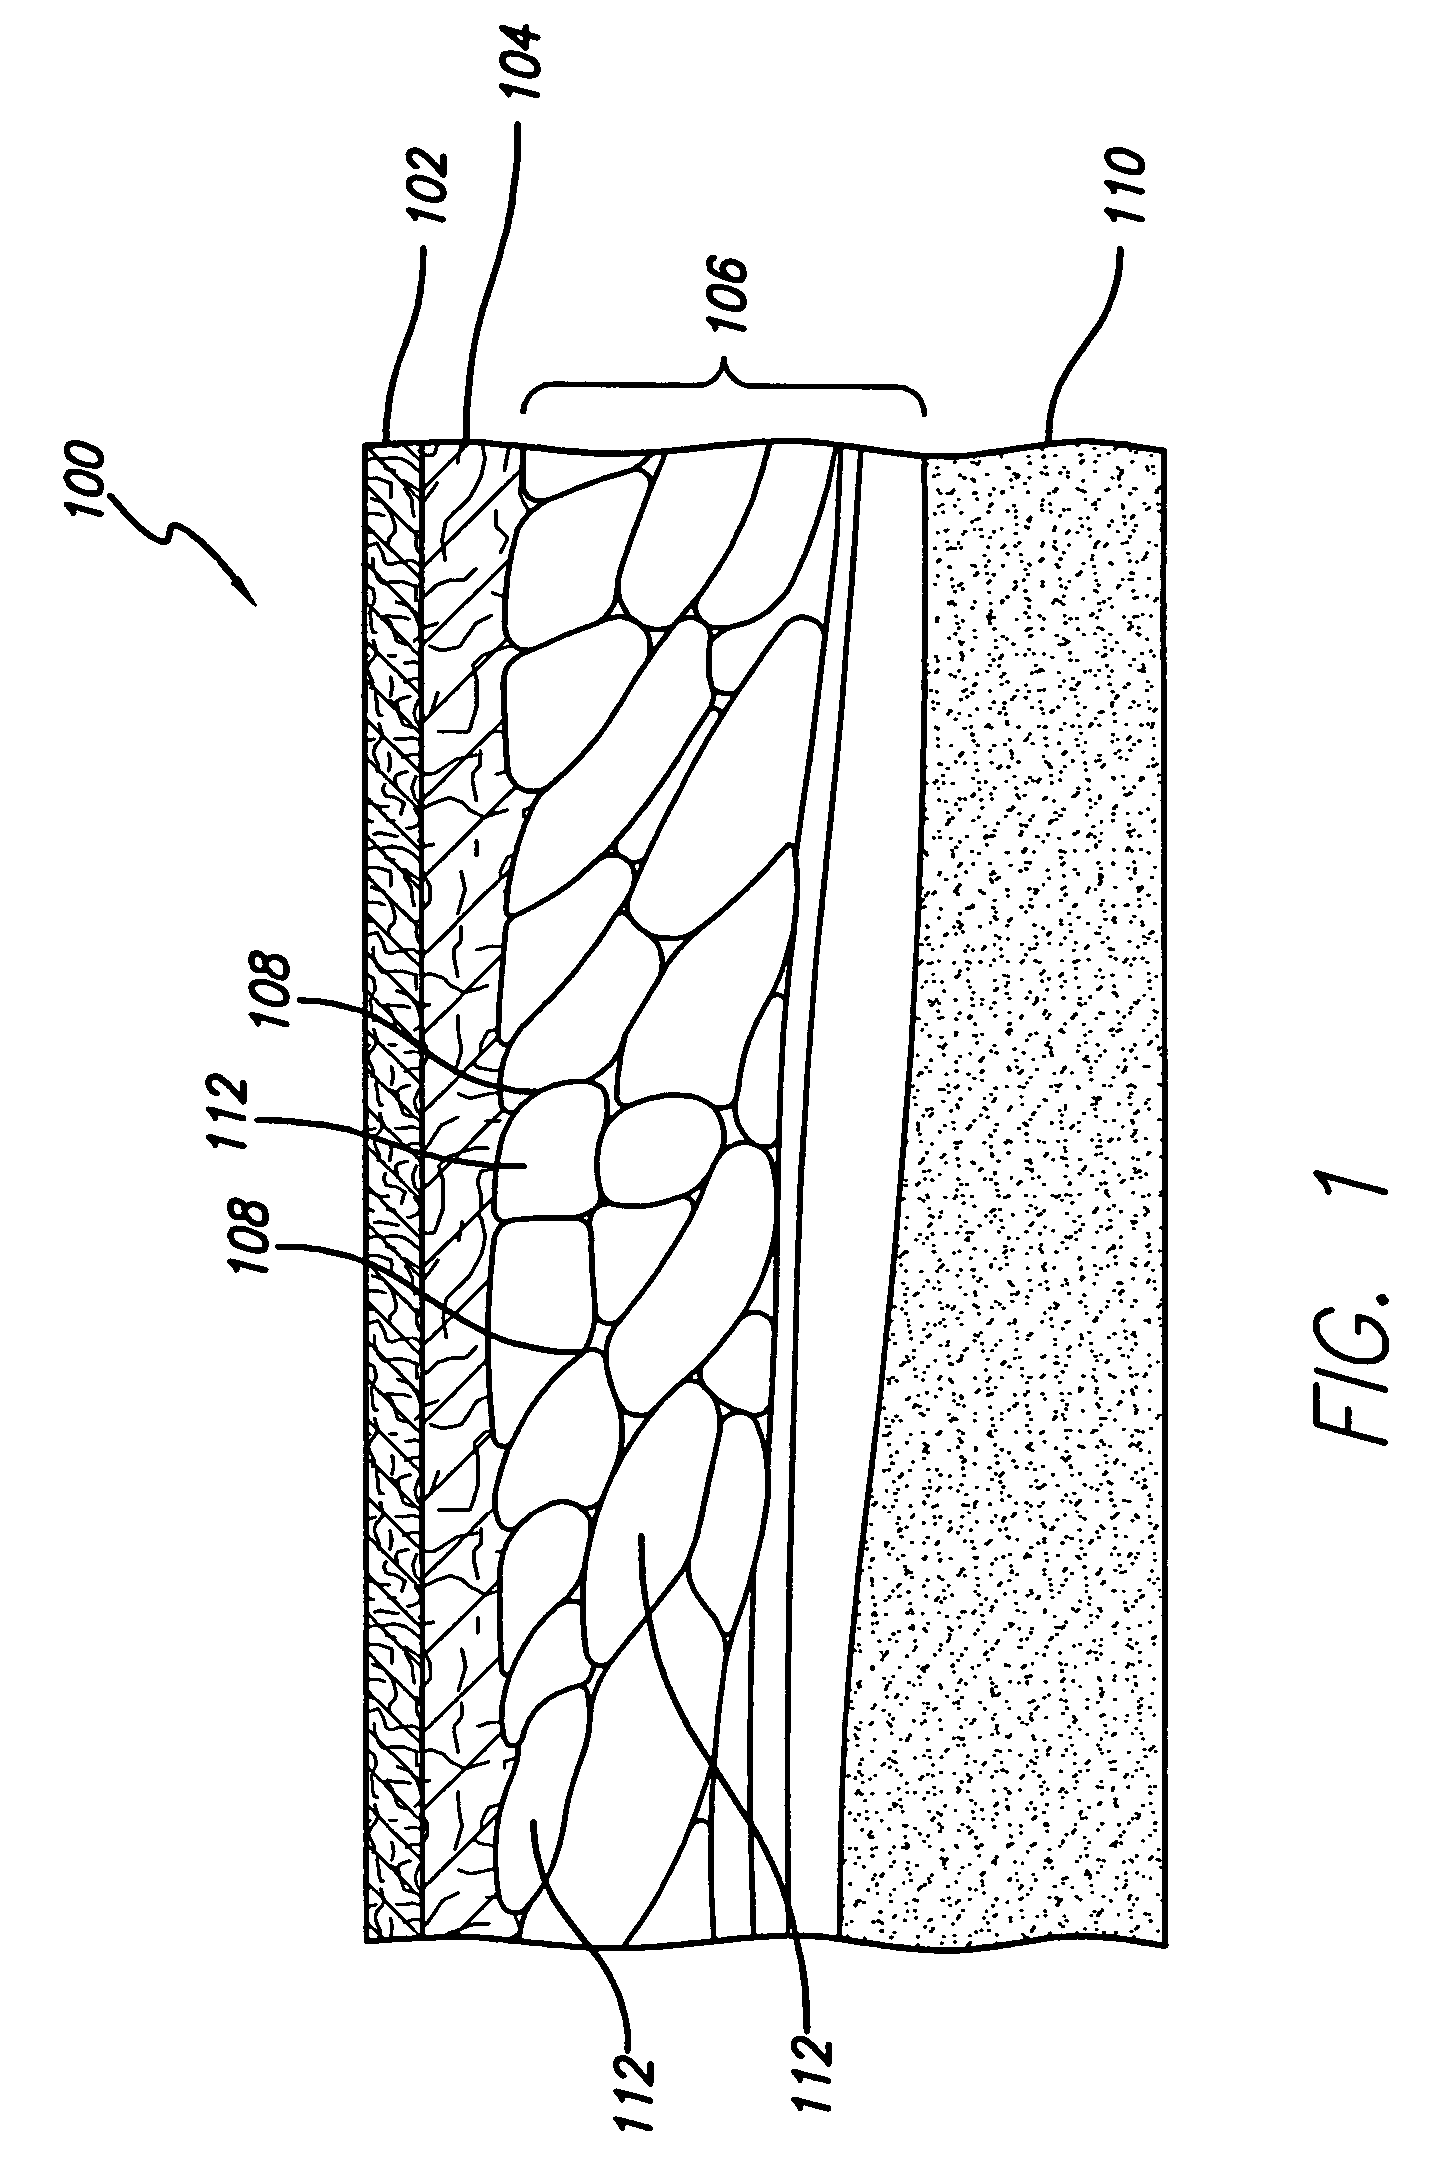 Methods and system for treating subcutaneous tissues